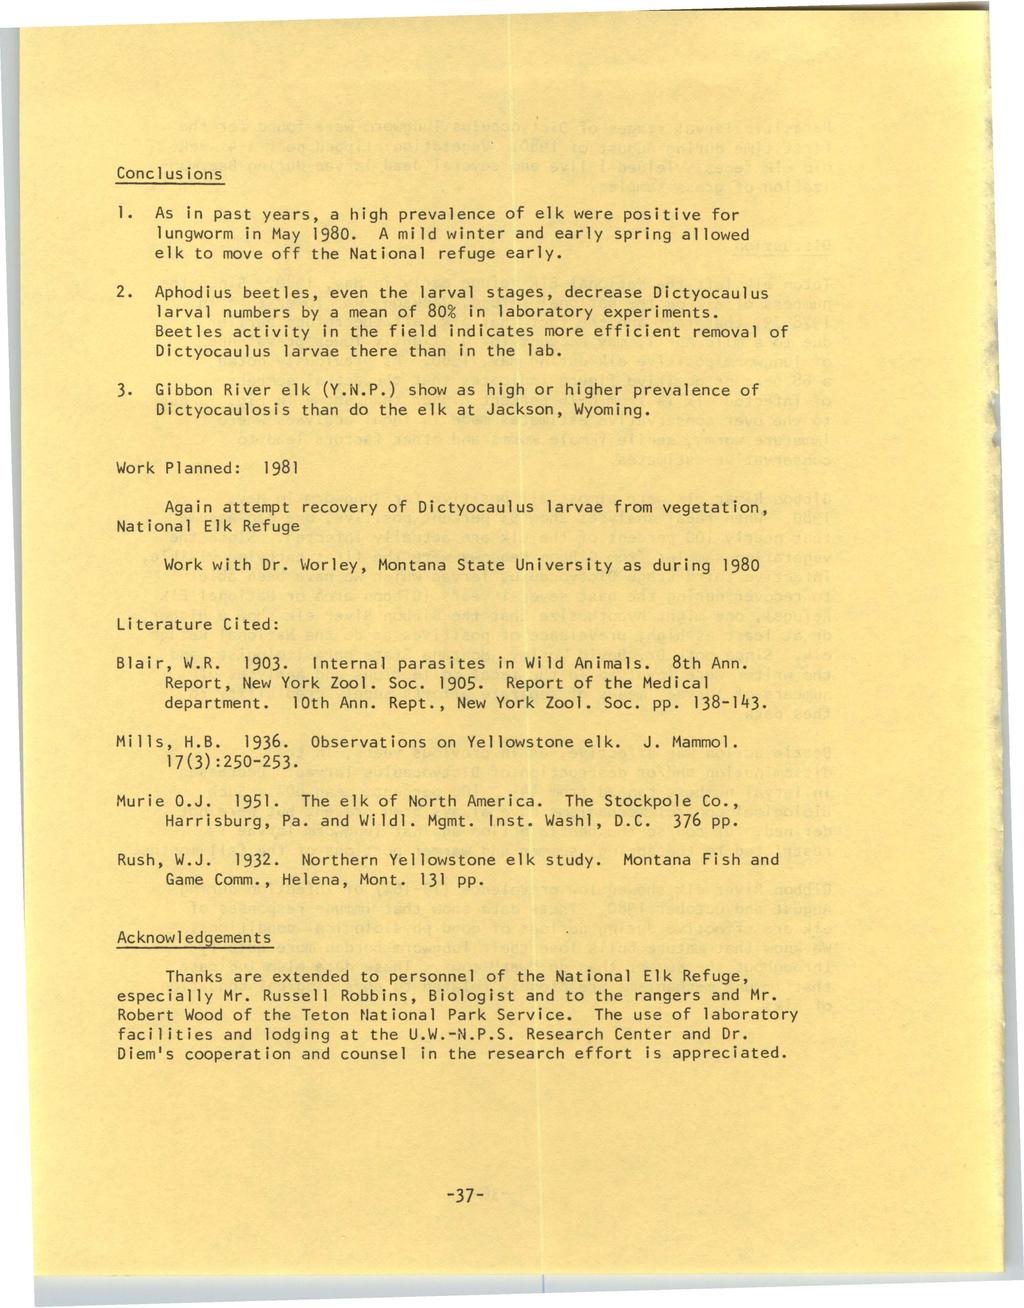 University of Wyoming National Park Service Research Center Annual Report, Vol. 4 [1980], Art. 6 Conclusions 1. As in past years, a high prevalence of elk were positive for lungworm in May 1980.